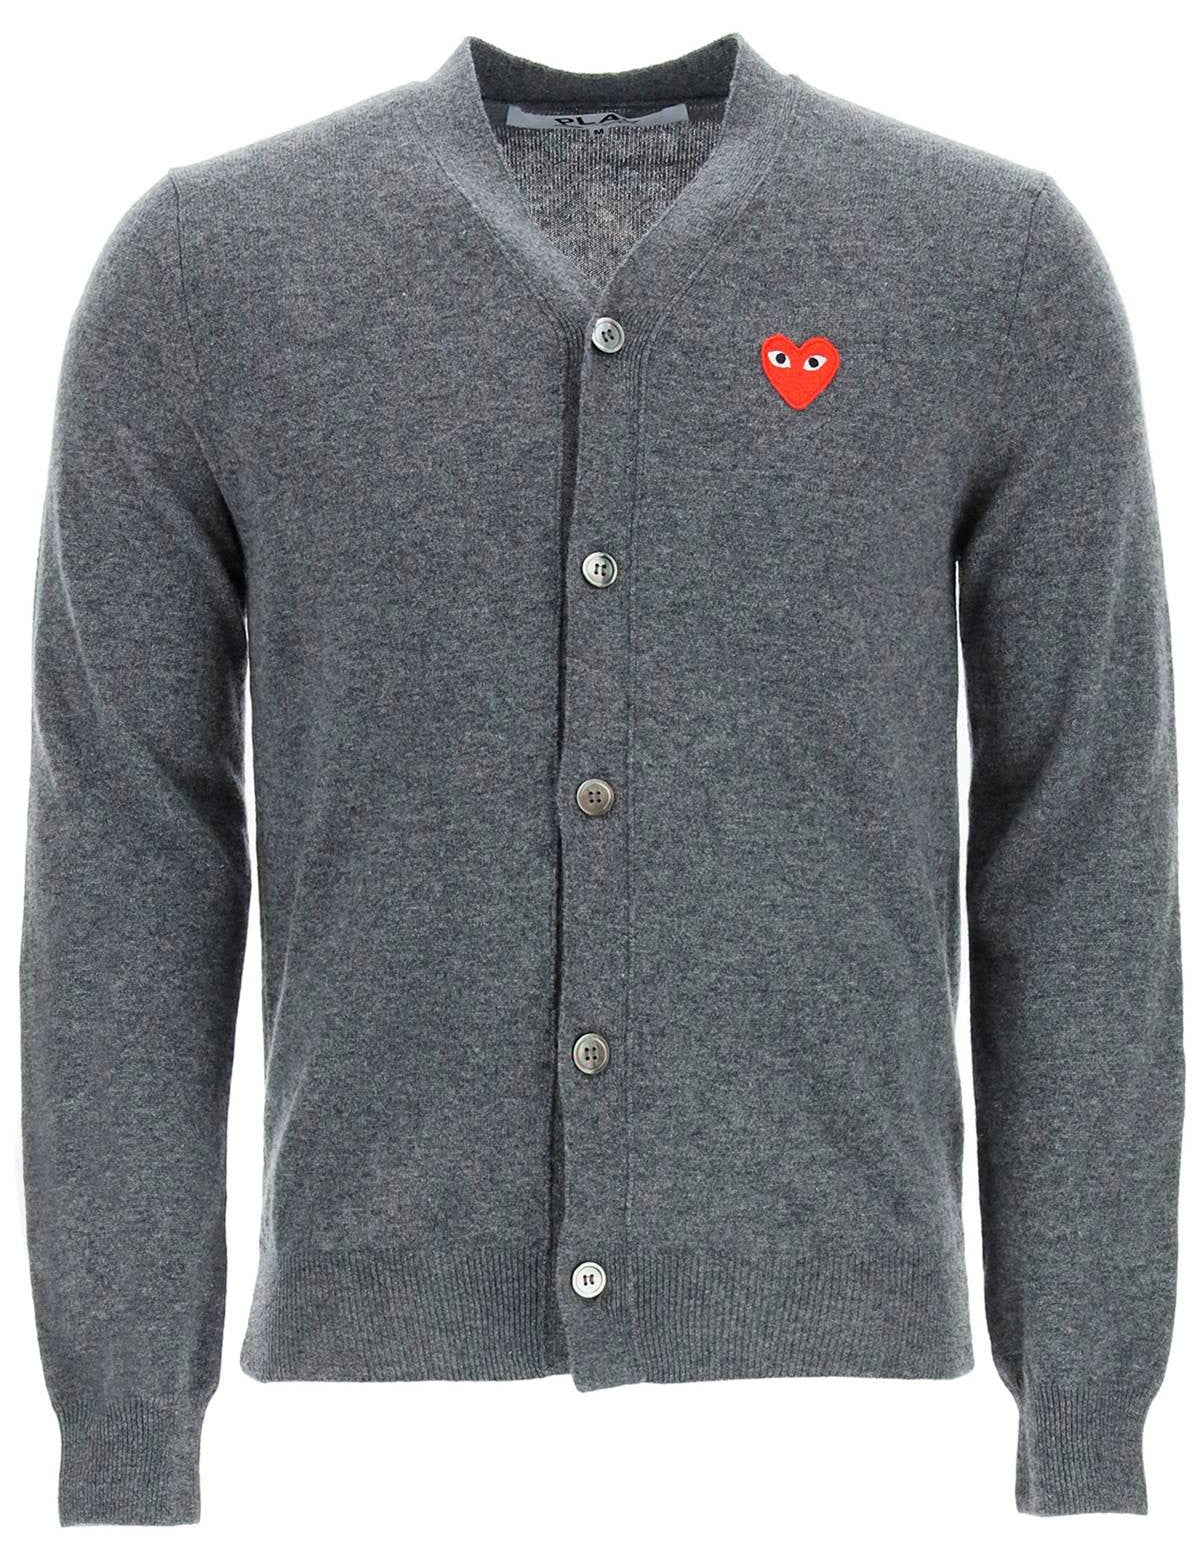 wool-cardigan-with-heart-patch.jpg